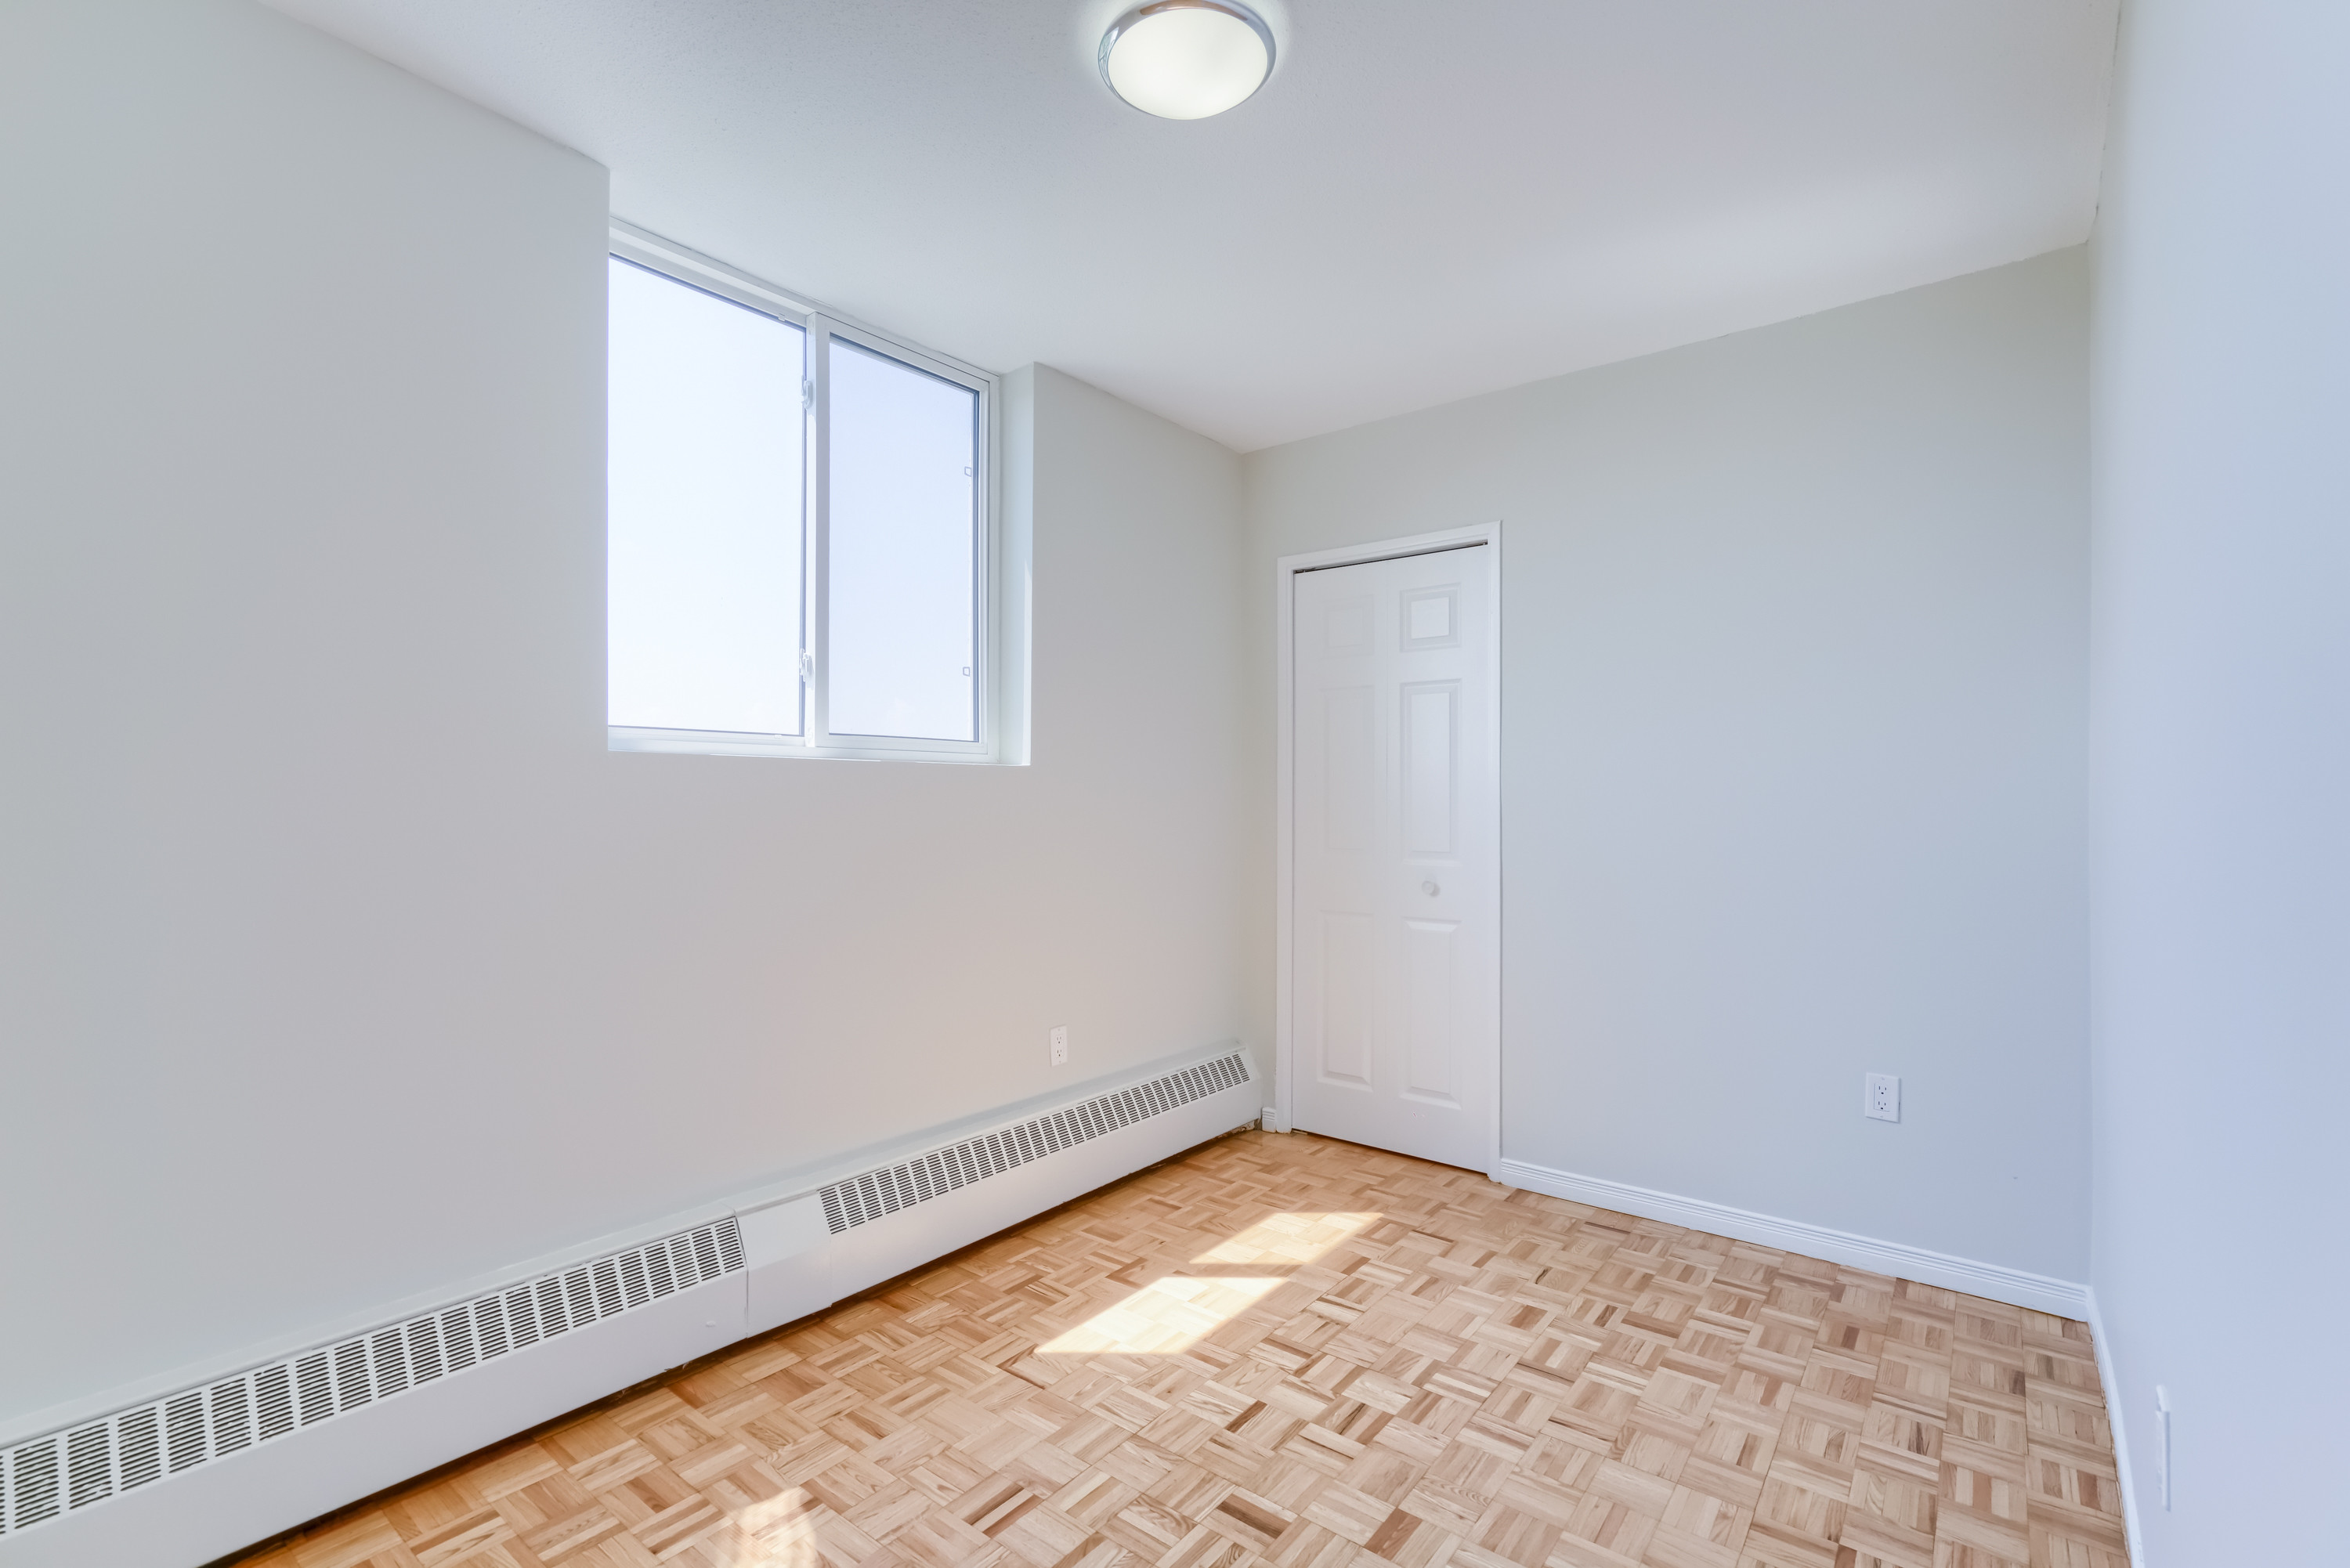 aa hardwood flooring etobicoke of barrie on apartments condos houses for rent throughout 47a420a5 e887 47ec b4e9 20a8d84bb646